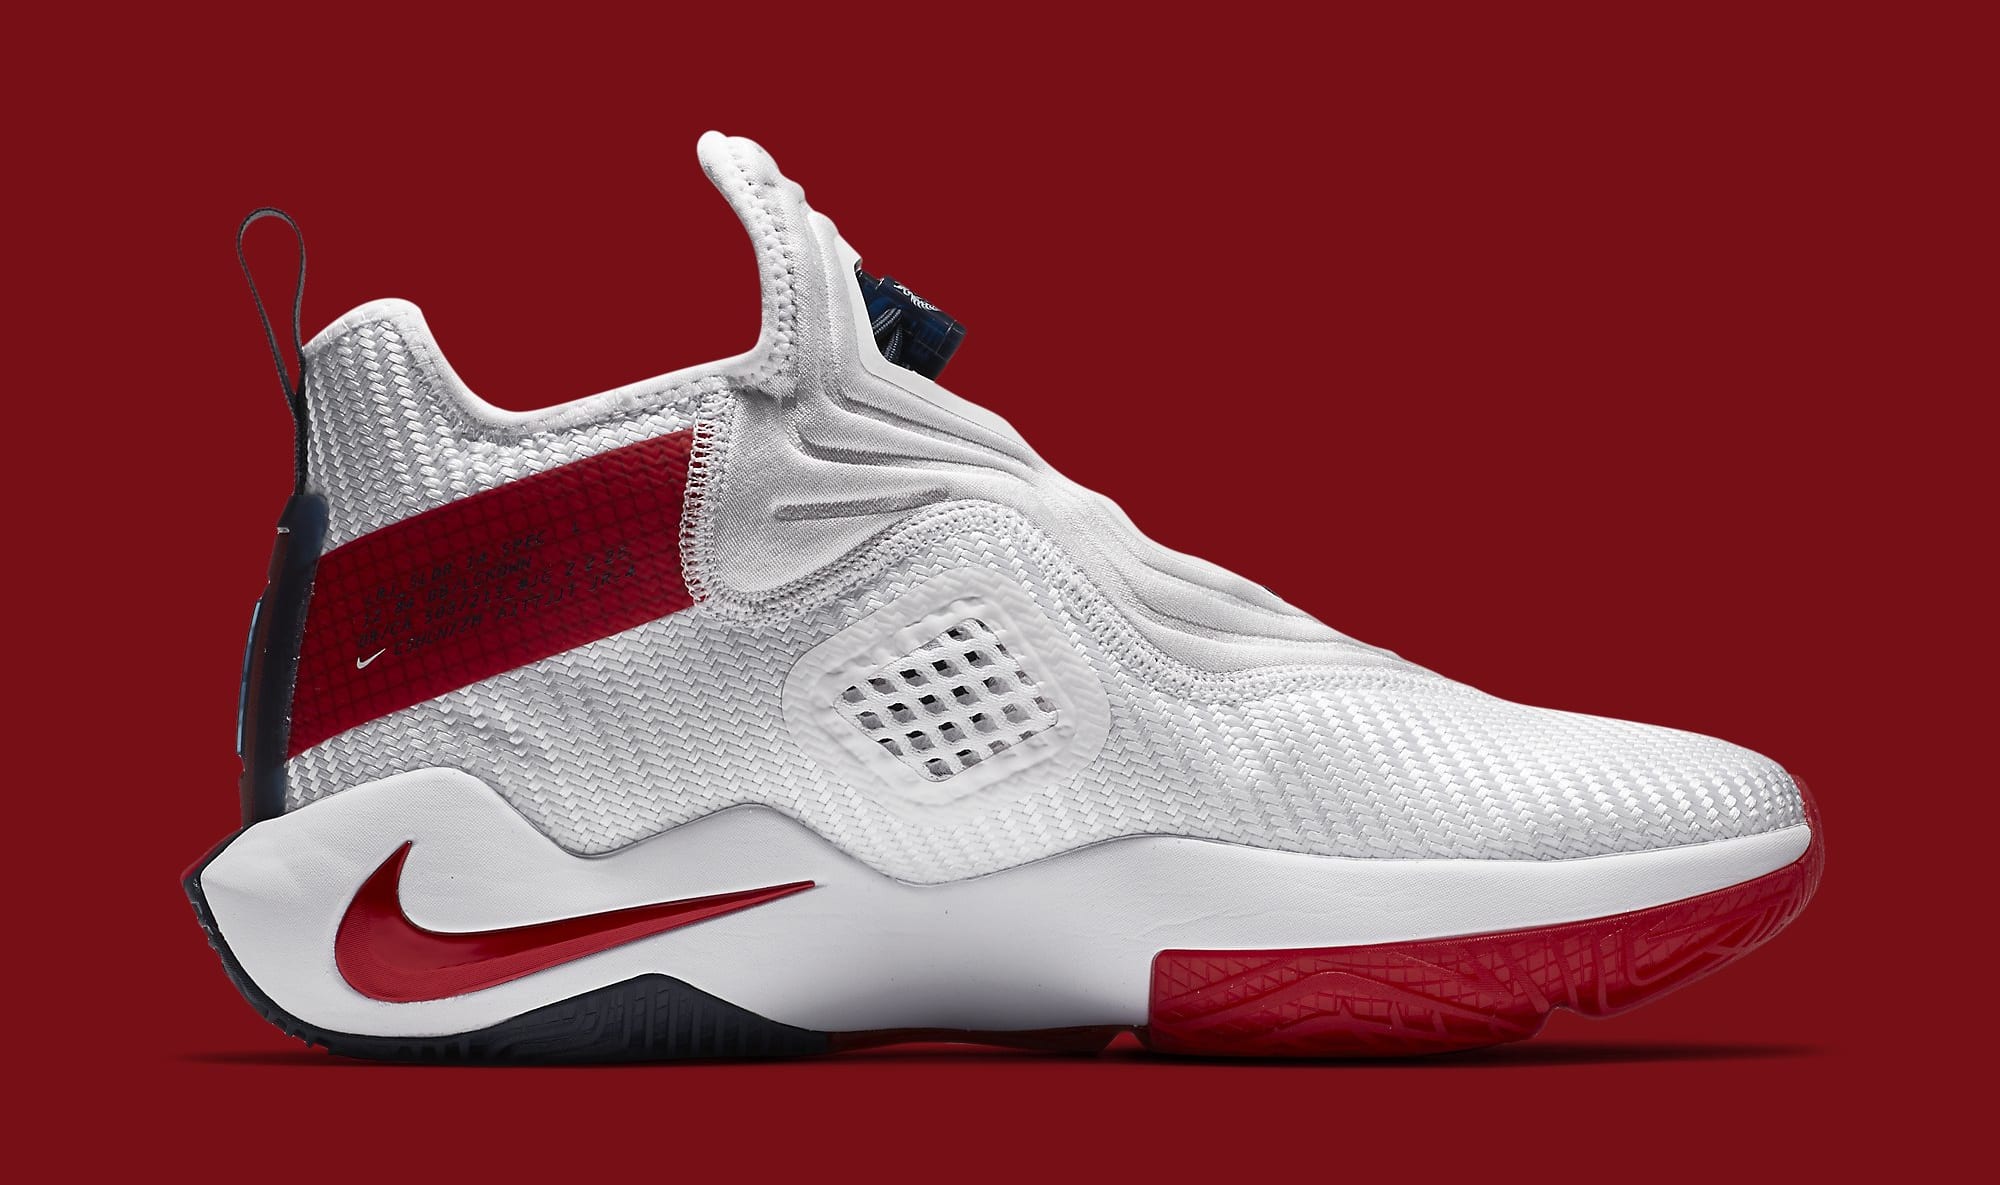 Nike LeBron Soldier 14 White/University Red-Team Red CK6024-100 Medial